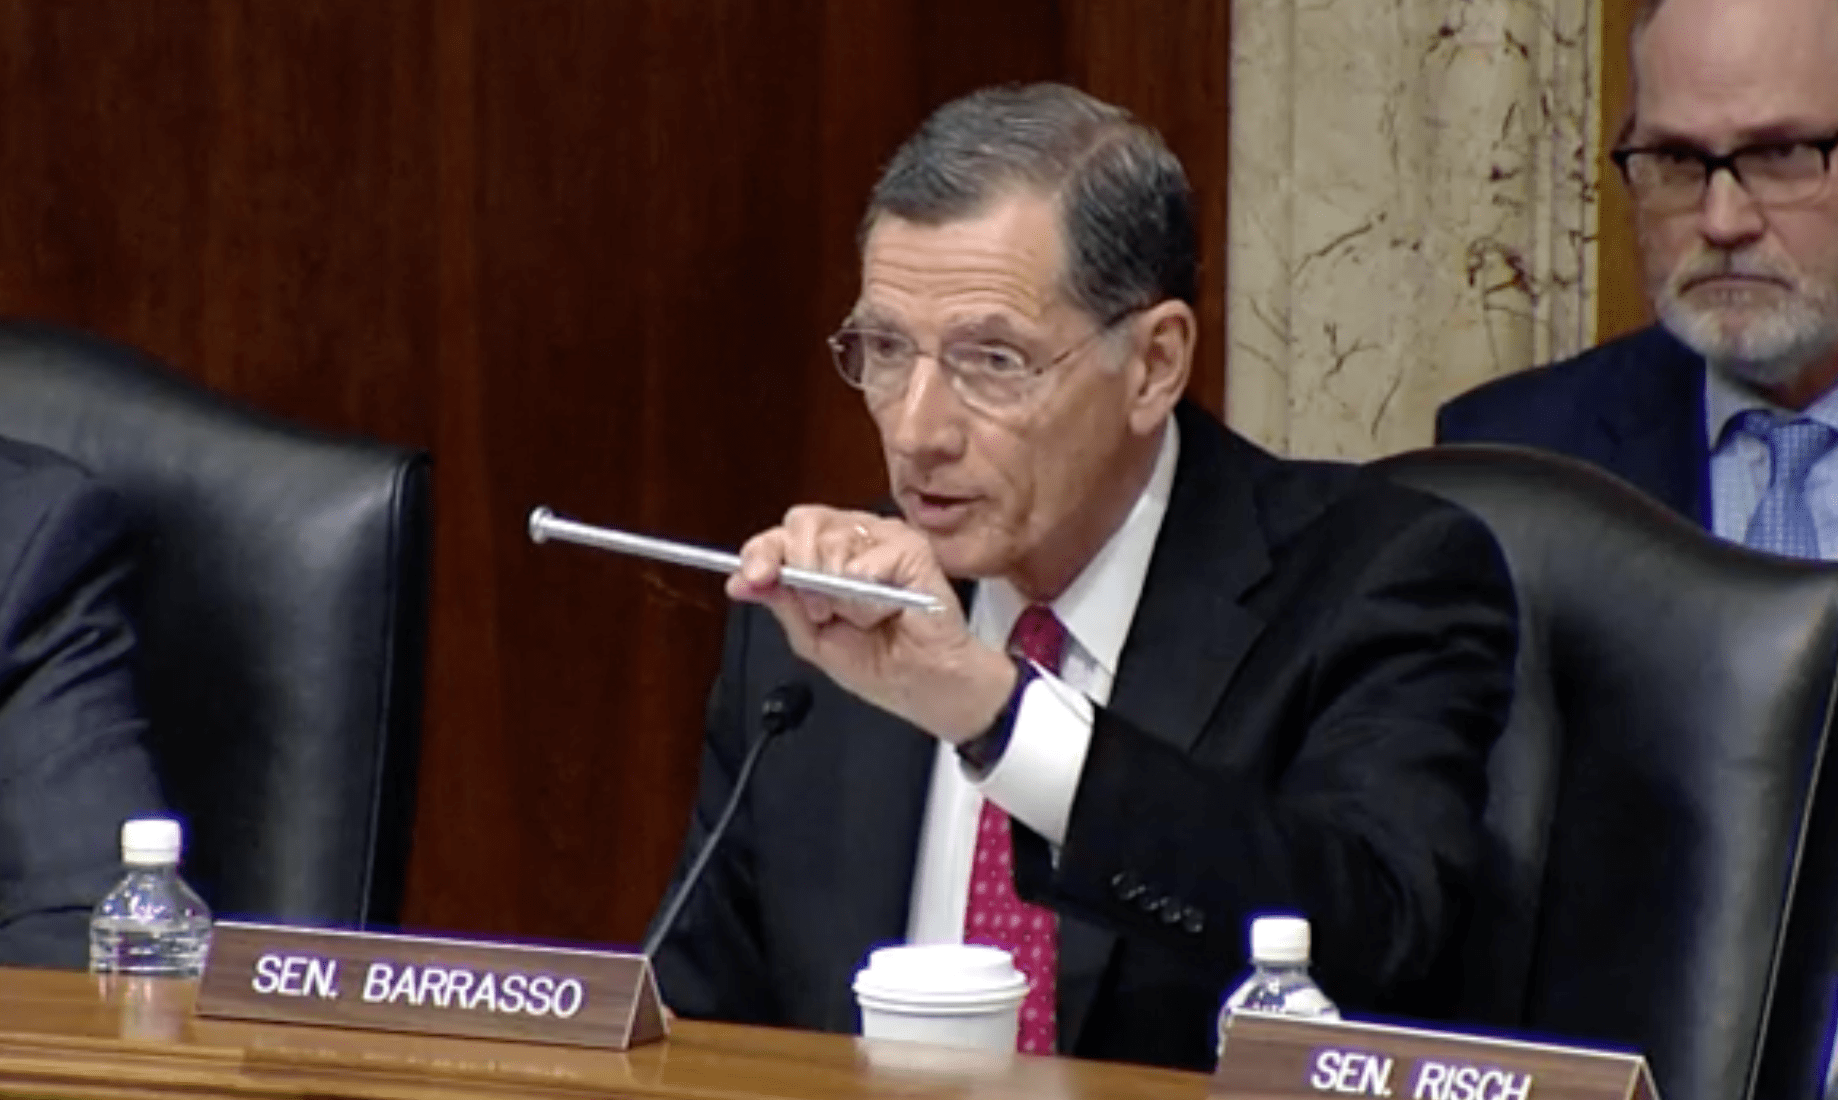 Sen. John Barrasso makes his opening remarks about Tracy Stone-Manning's involvement in a tree-spiking incident.